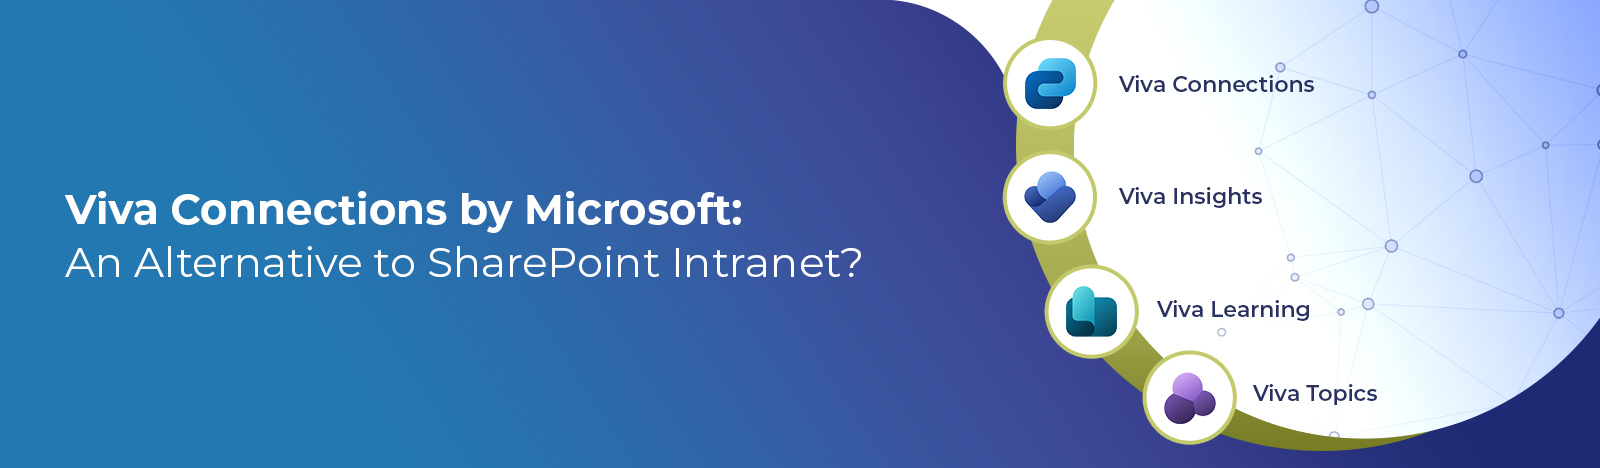 Viva Connections by Microsoft: An Alternative to SharePoint Intranet?